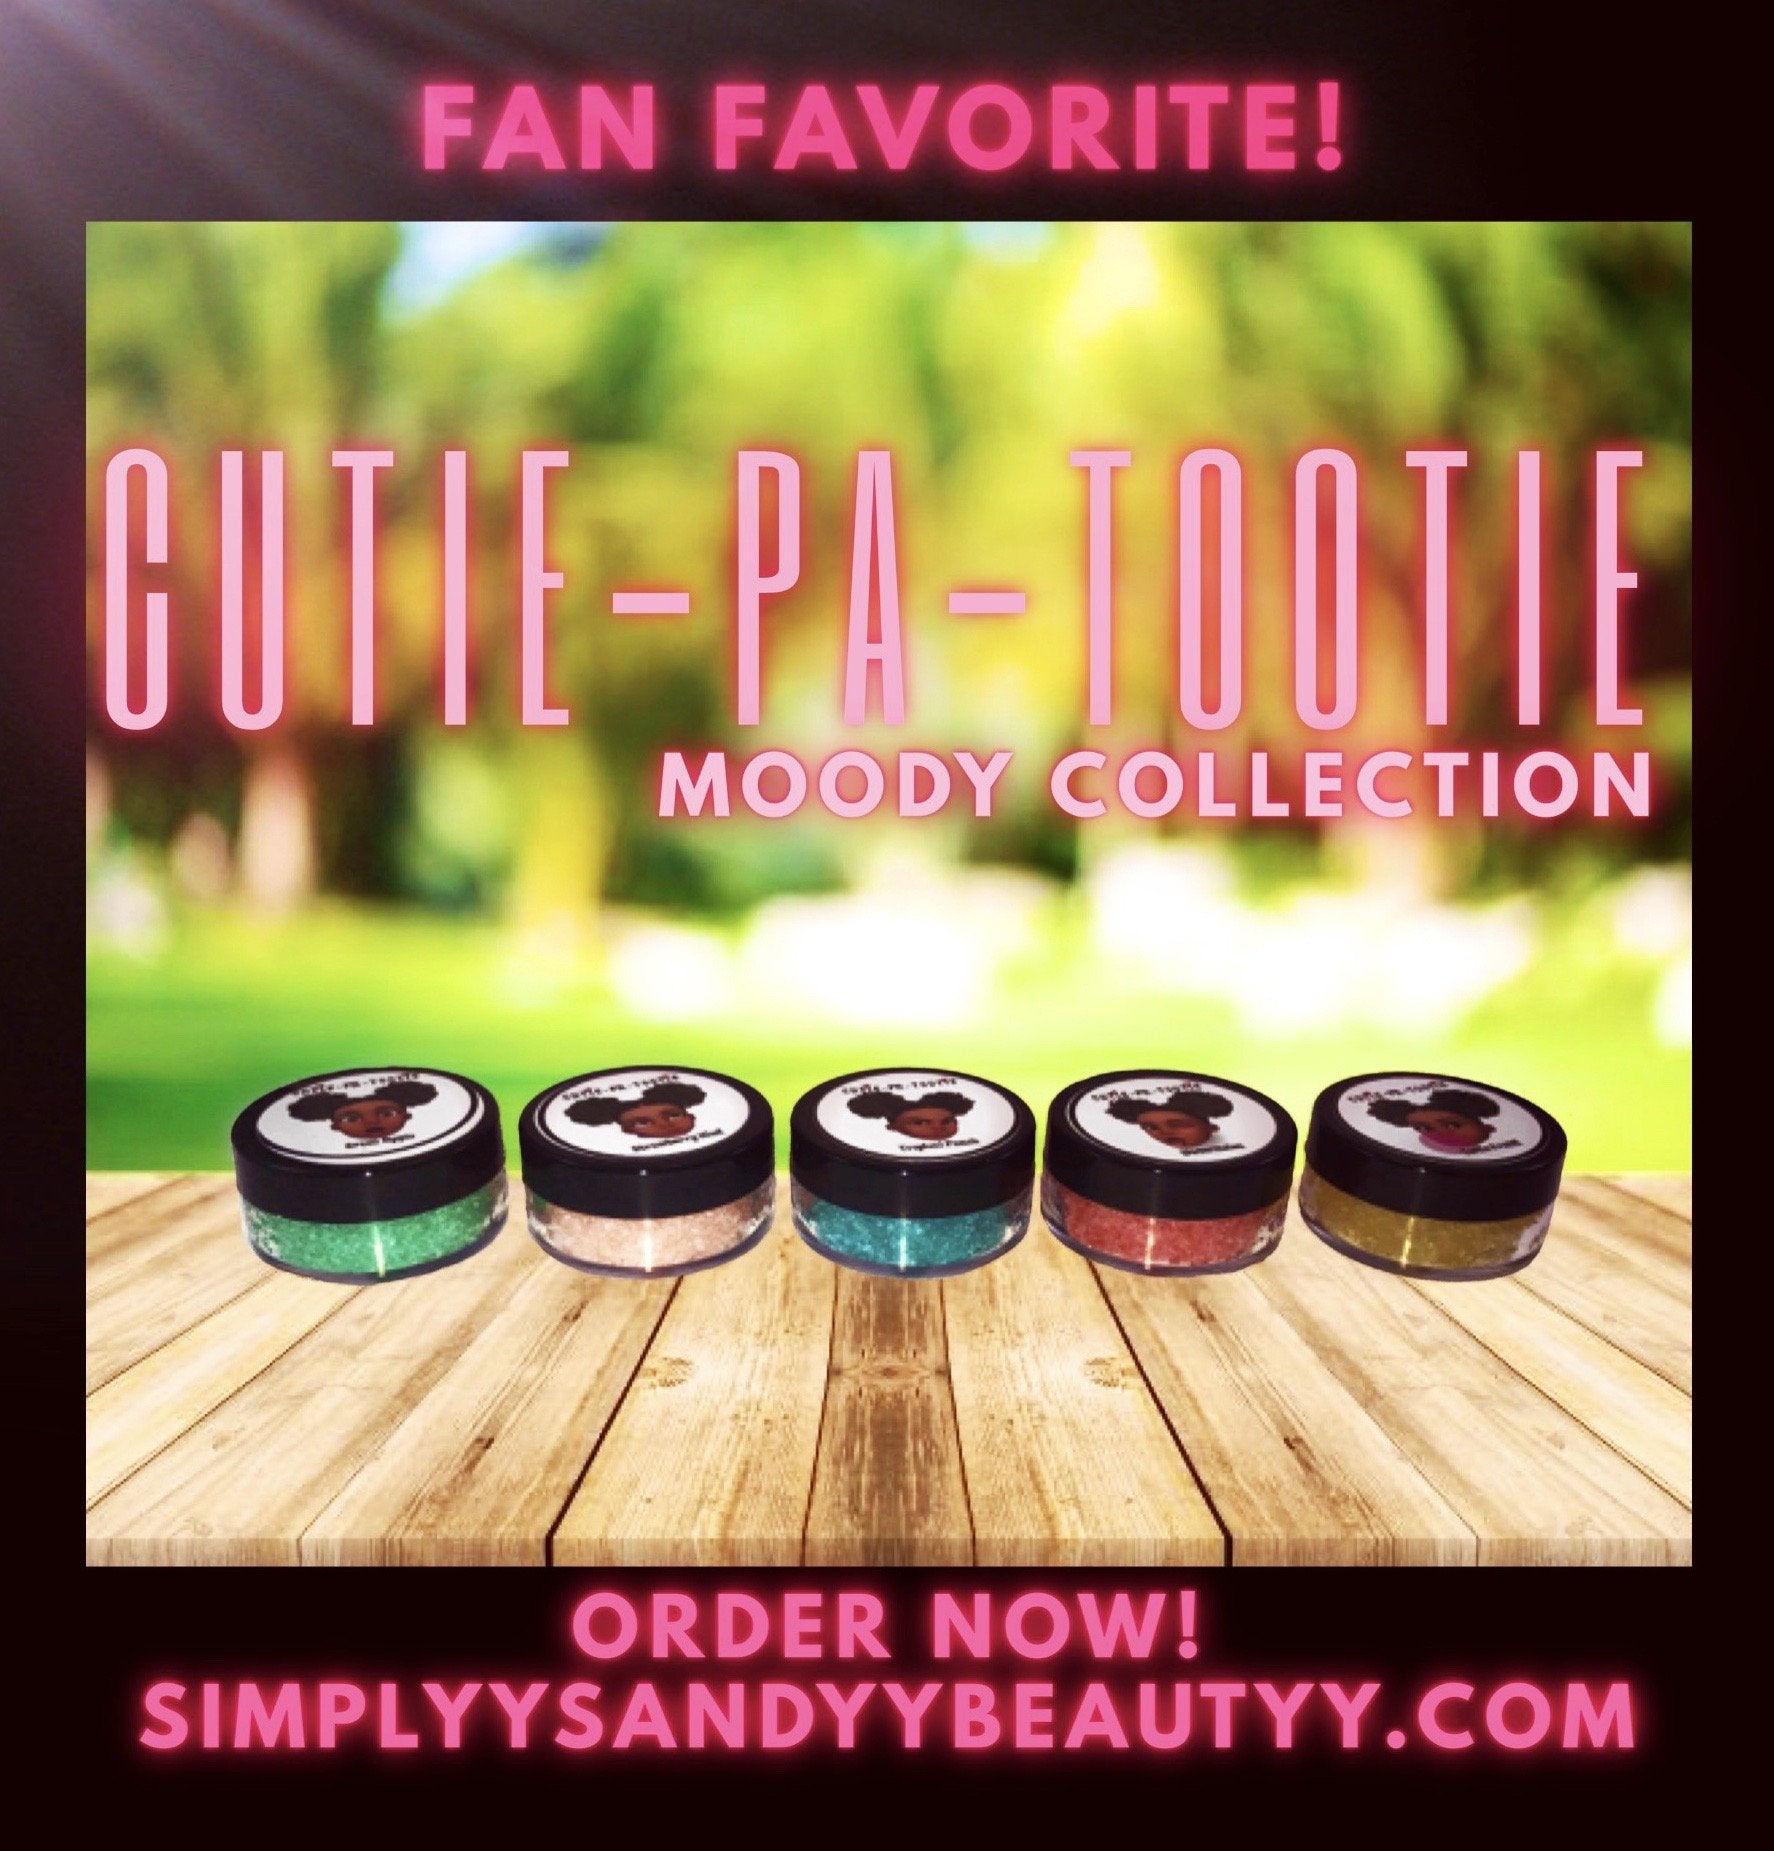 Cutie-Pa-Tootie Moody Collection Full